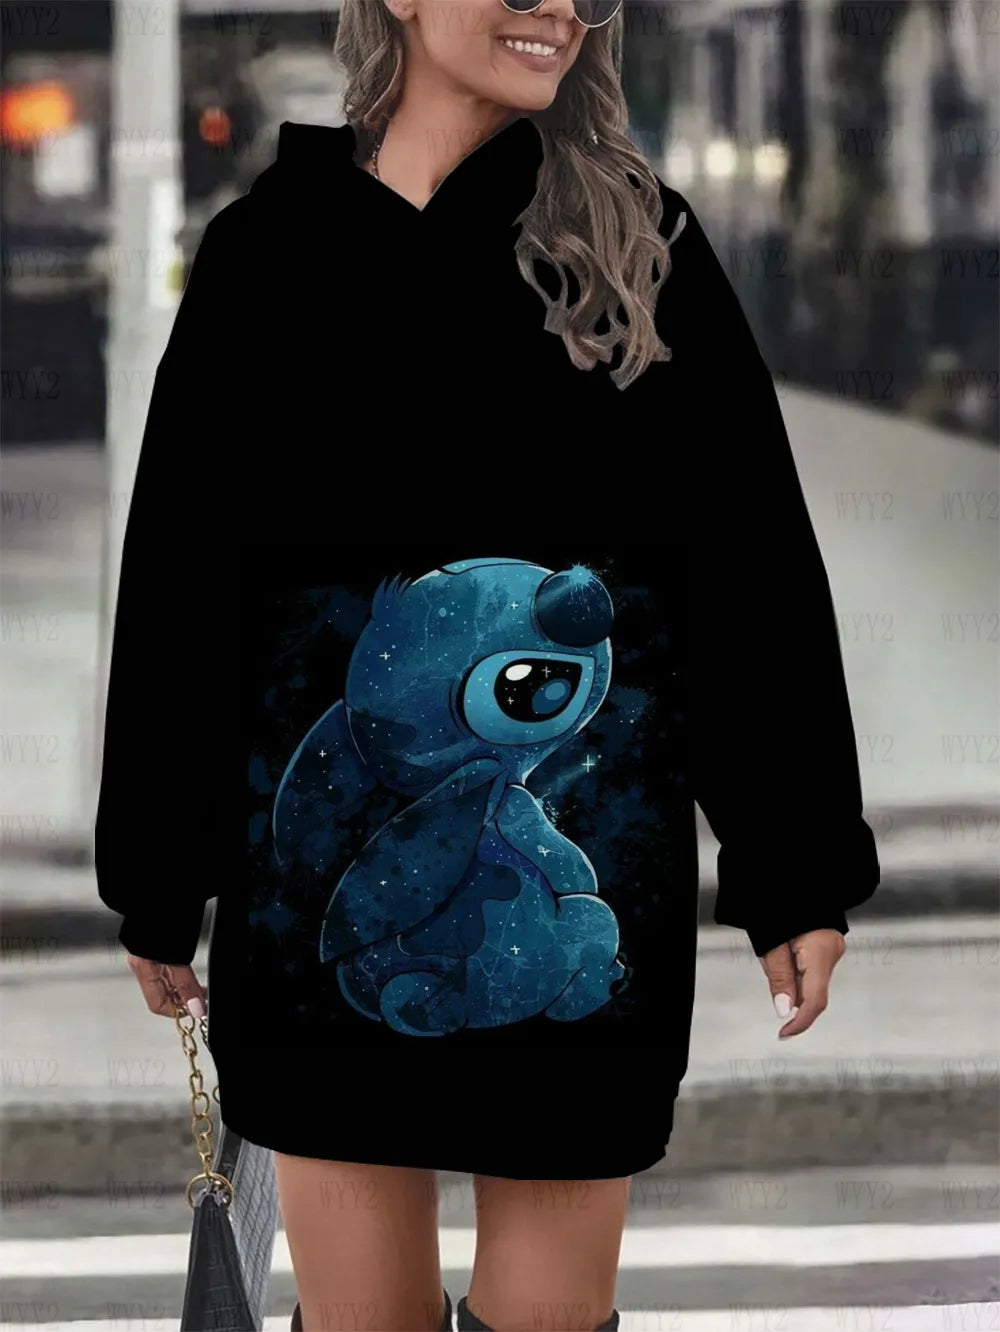 Ladies Sweater Casual Printing Disney Stitch Round Neck Long Sleeve Hooded Sweater Dress Simple Fashion Ladies Clothing New